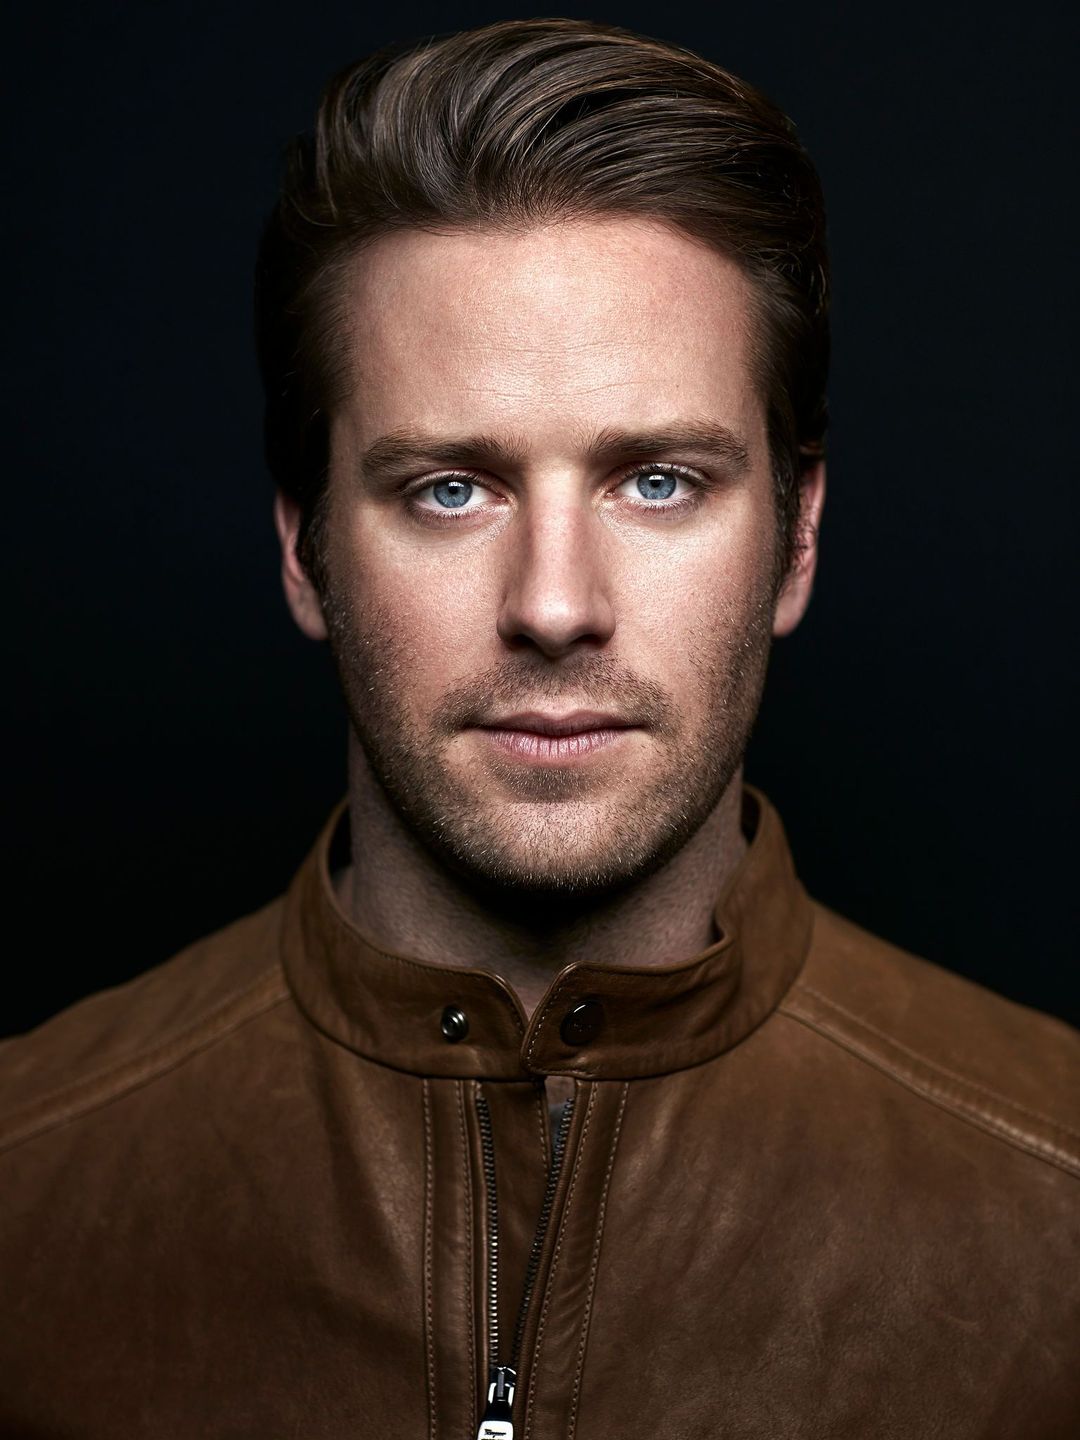 Armie Hammer life story